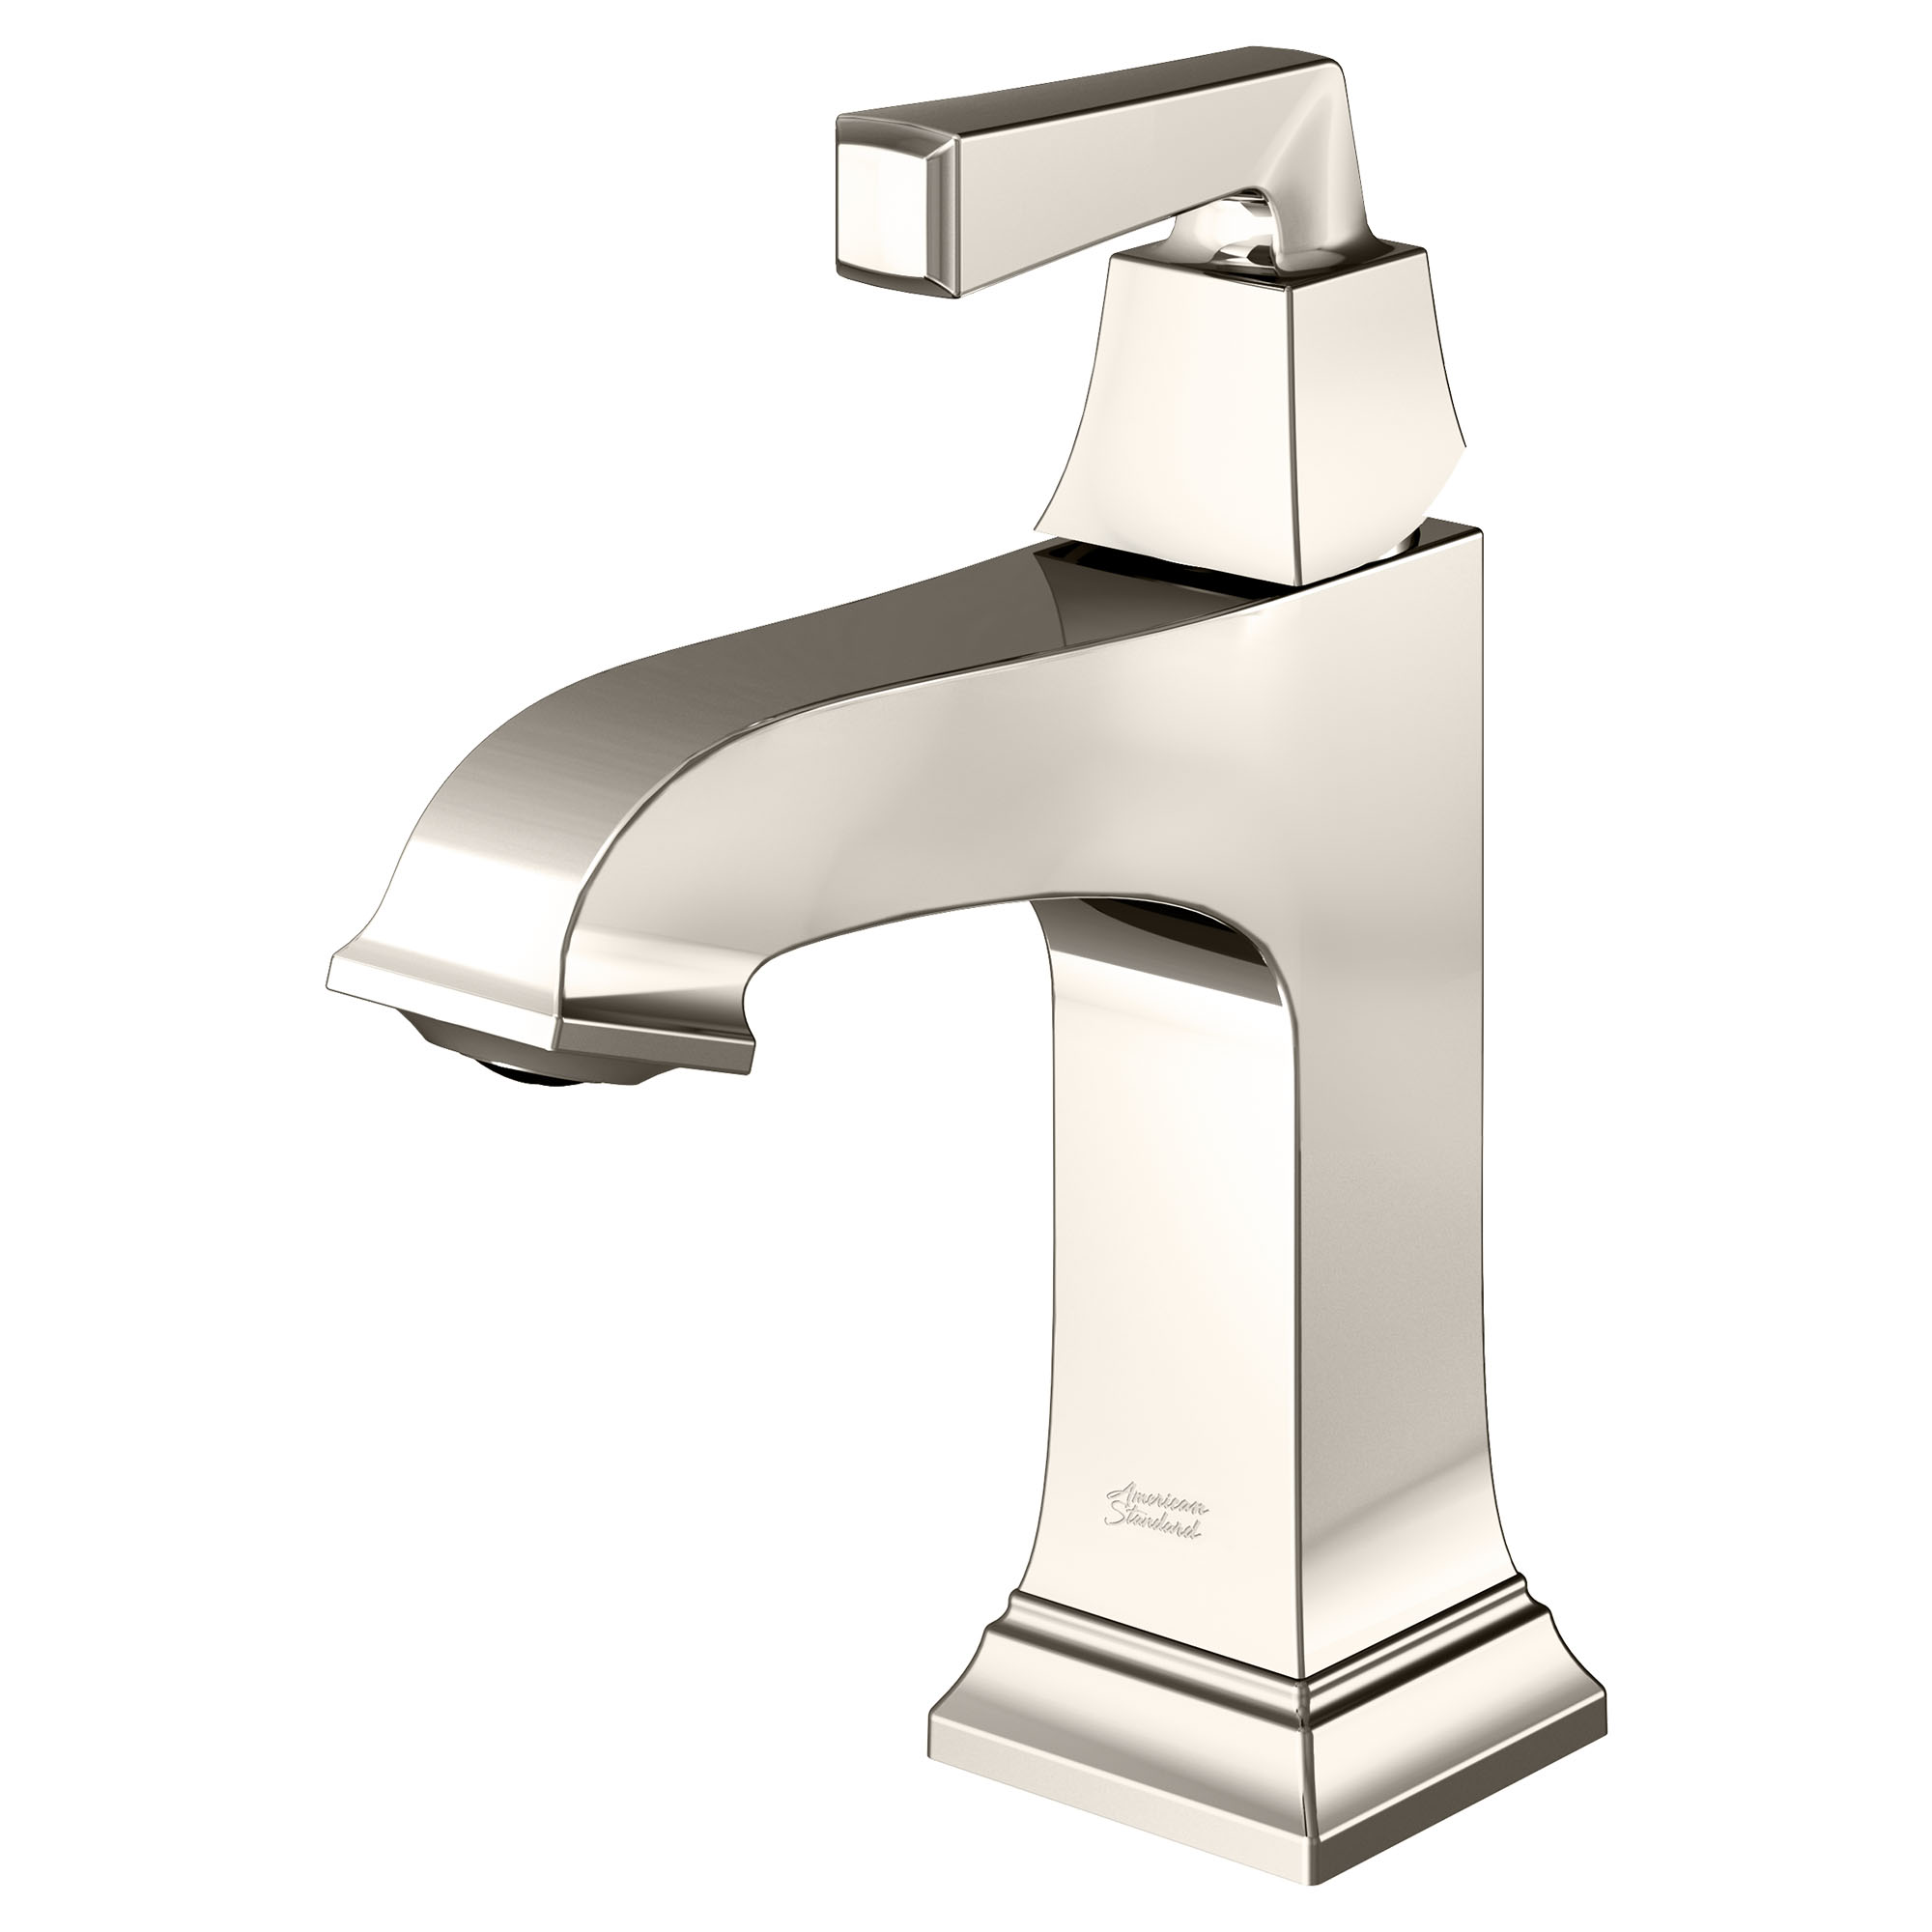 Town Square™ S Single Hole Single-Handle Bathroom Faucet 1.2 gpm/4.5 L/min With Lever Handle